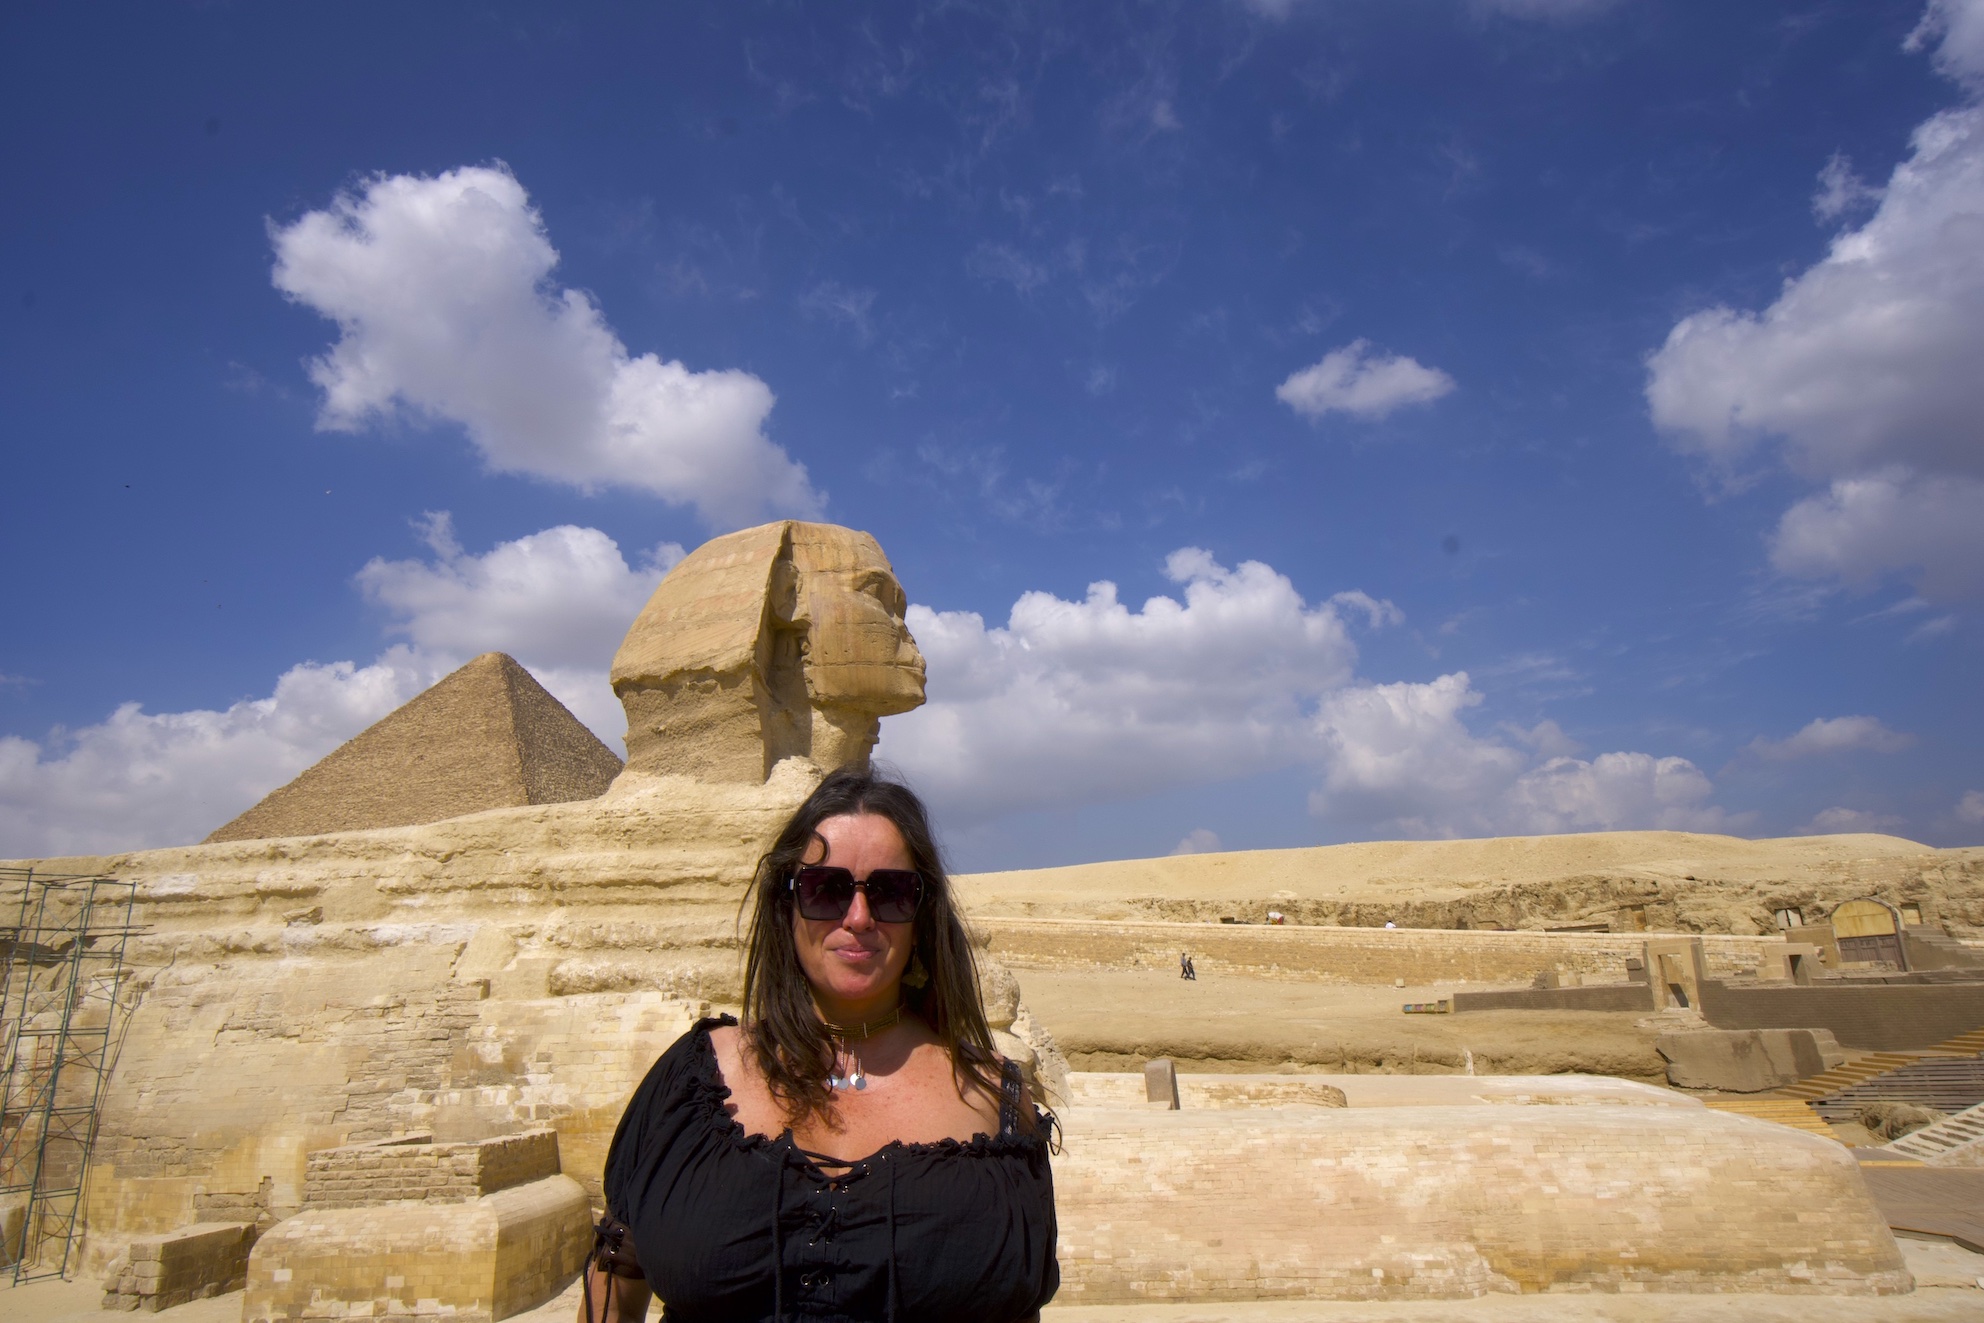 Pilar and the Sphinx at the back in the Pyramids of Giza complex